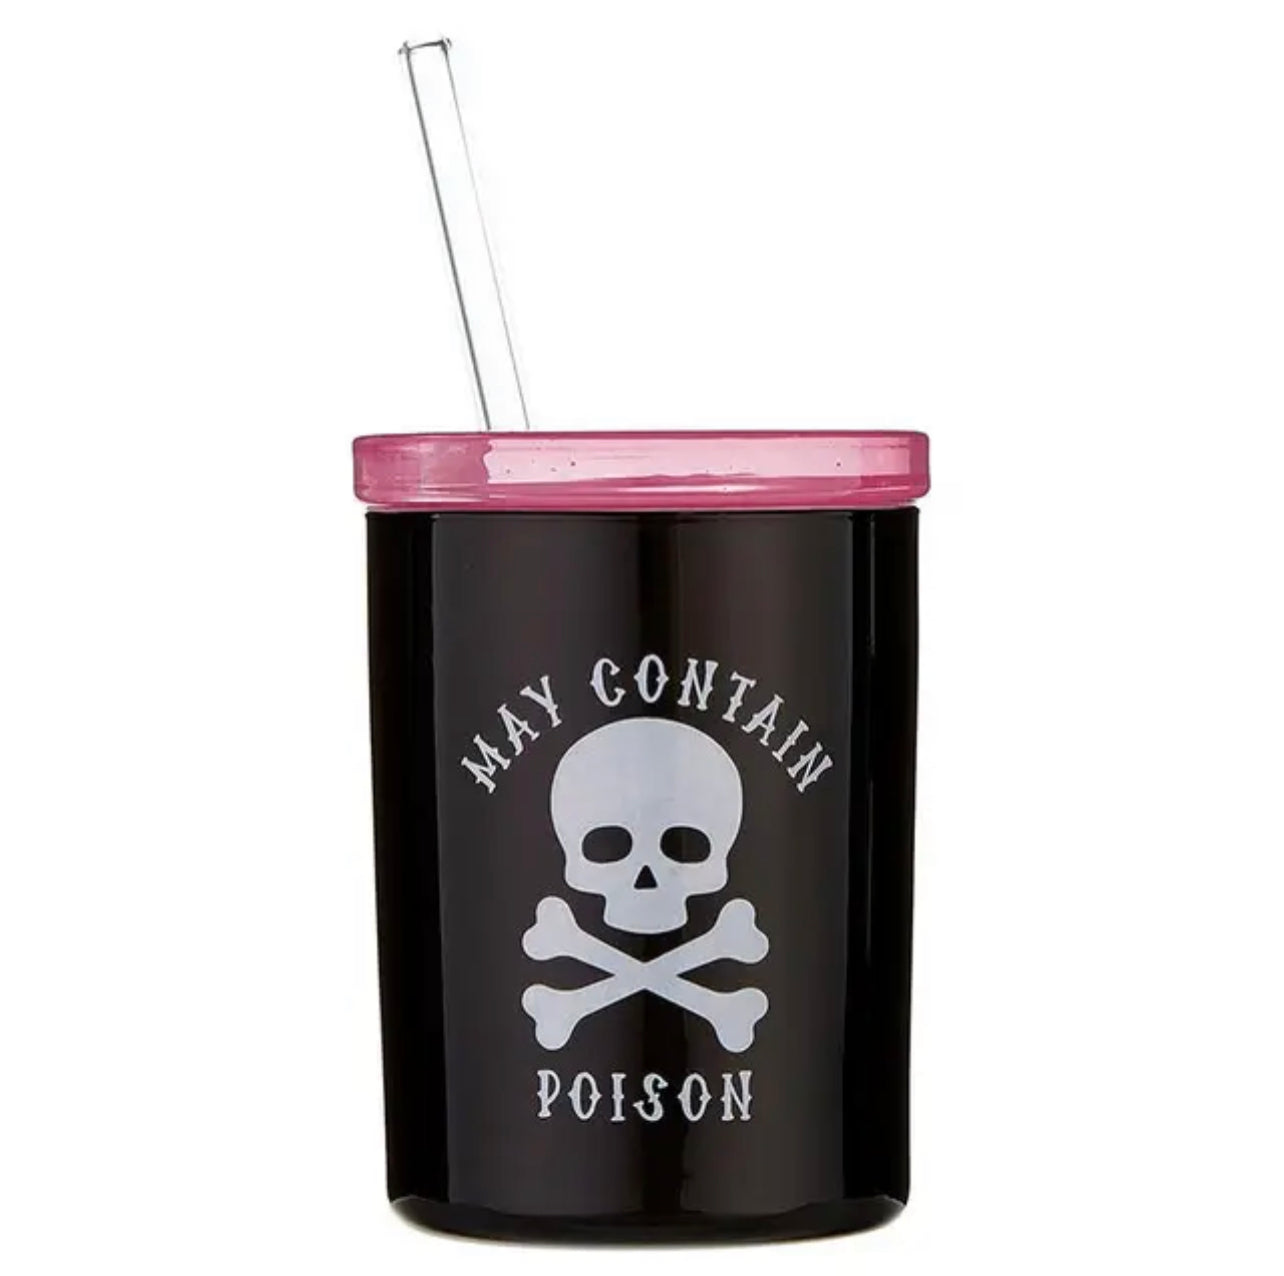 Halloween themed double old fashoined glass in black with a pink glass lid and glass straw, design features skull and cross bones that say "may contain poison"